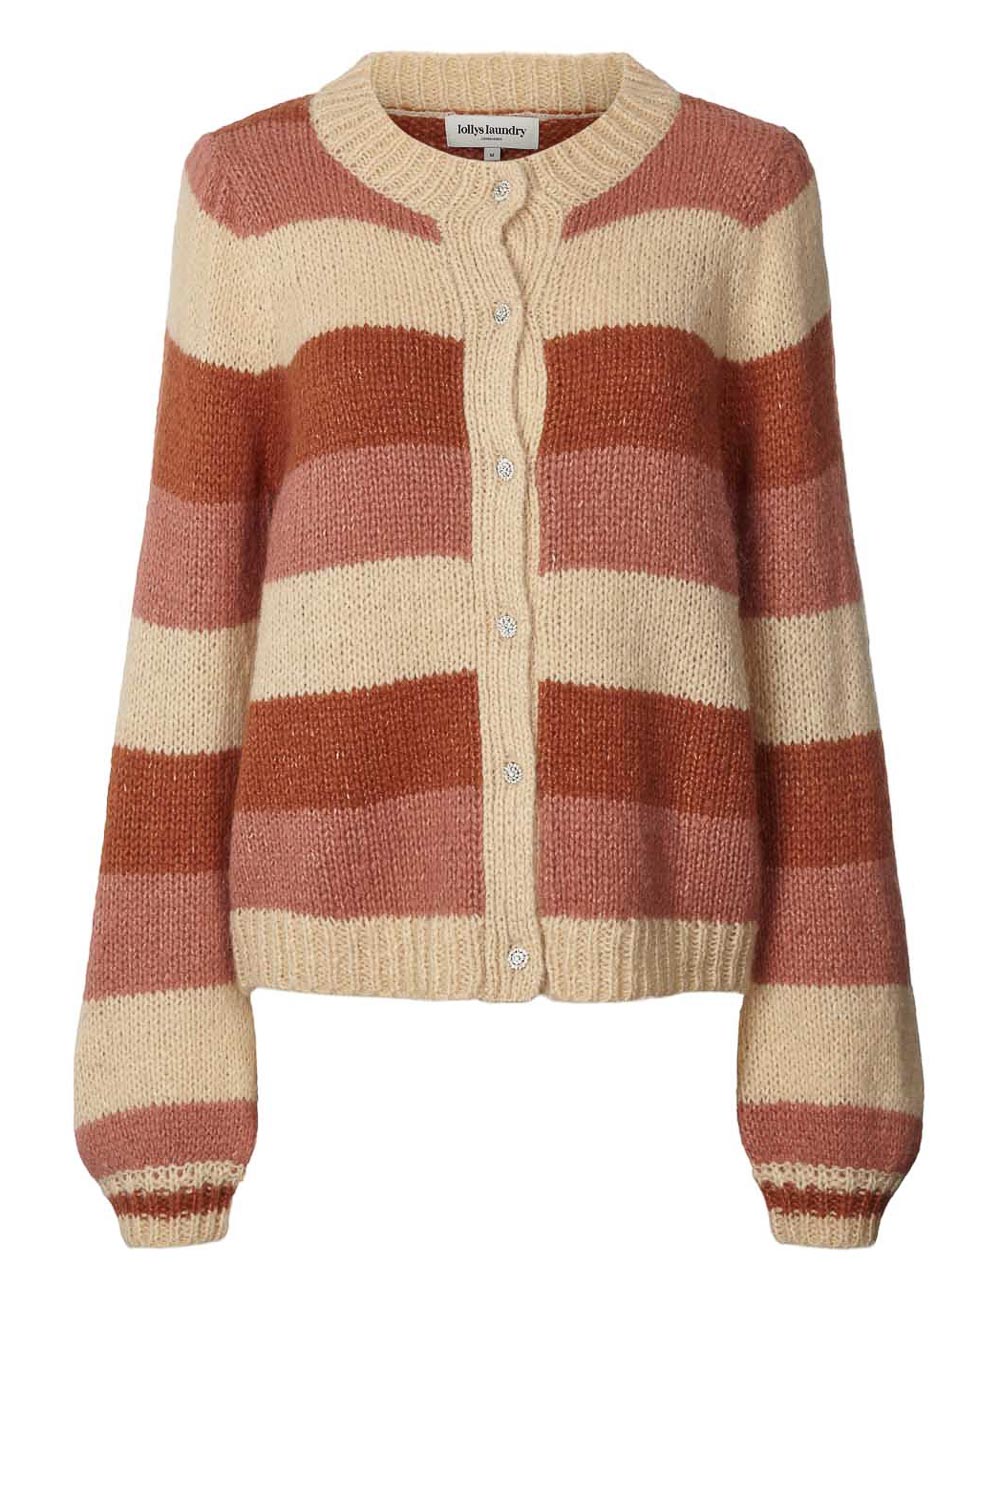 Distinguir hogar Monumento Knitted cardigan statement Pippa | natural... | Lollys Laundry | Little Soho